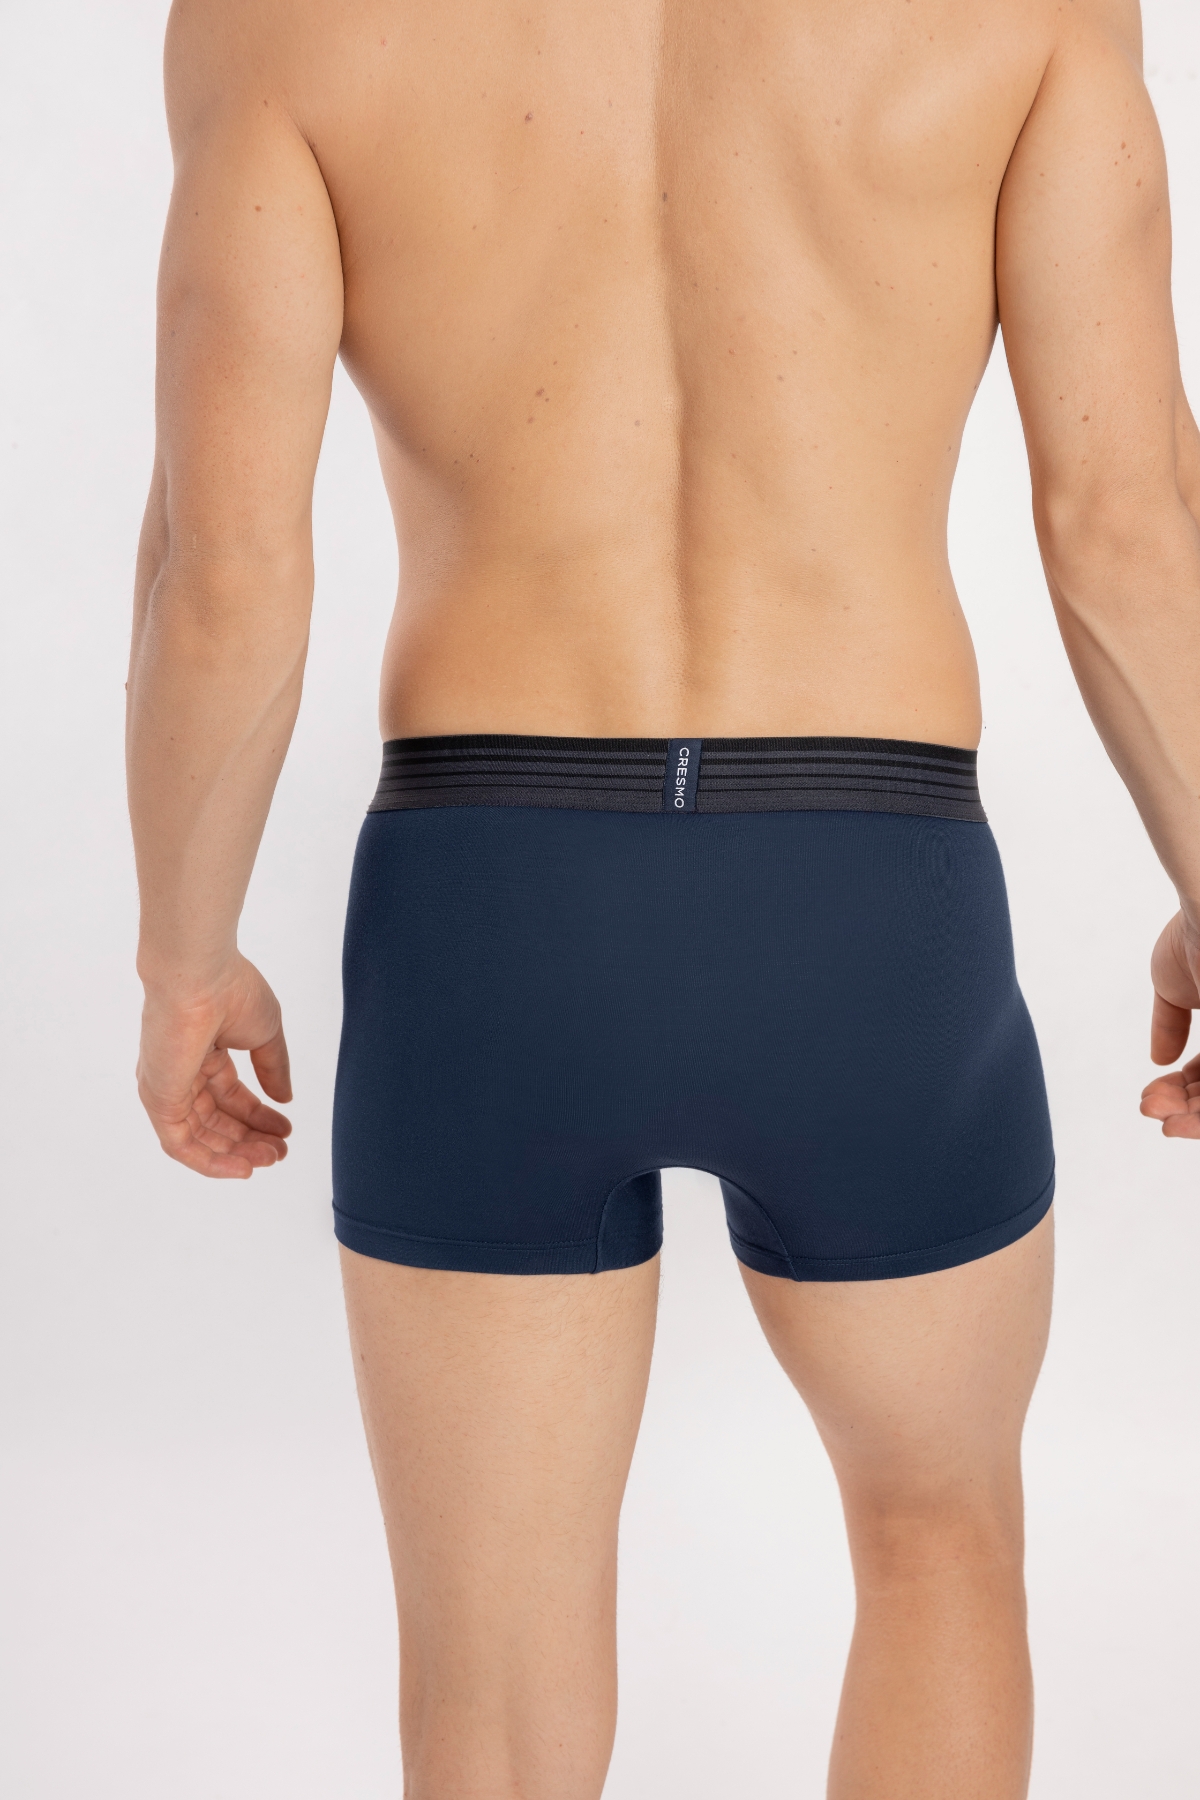 CRESMO | CRESMO Men's Anti-Microbial Micro Modal Underwear Breathable Ultra Soft Trunk (Pack of 3) 4